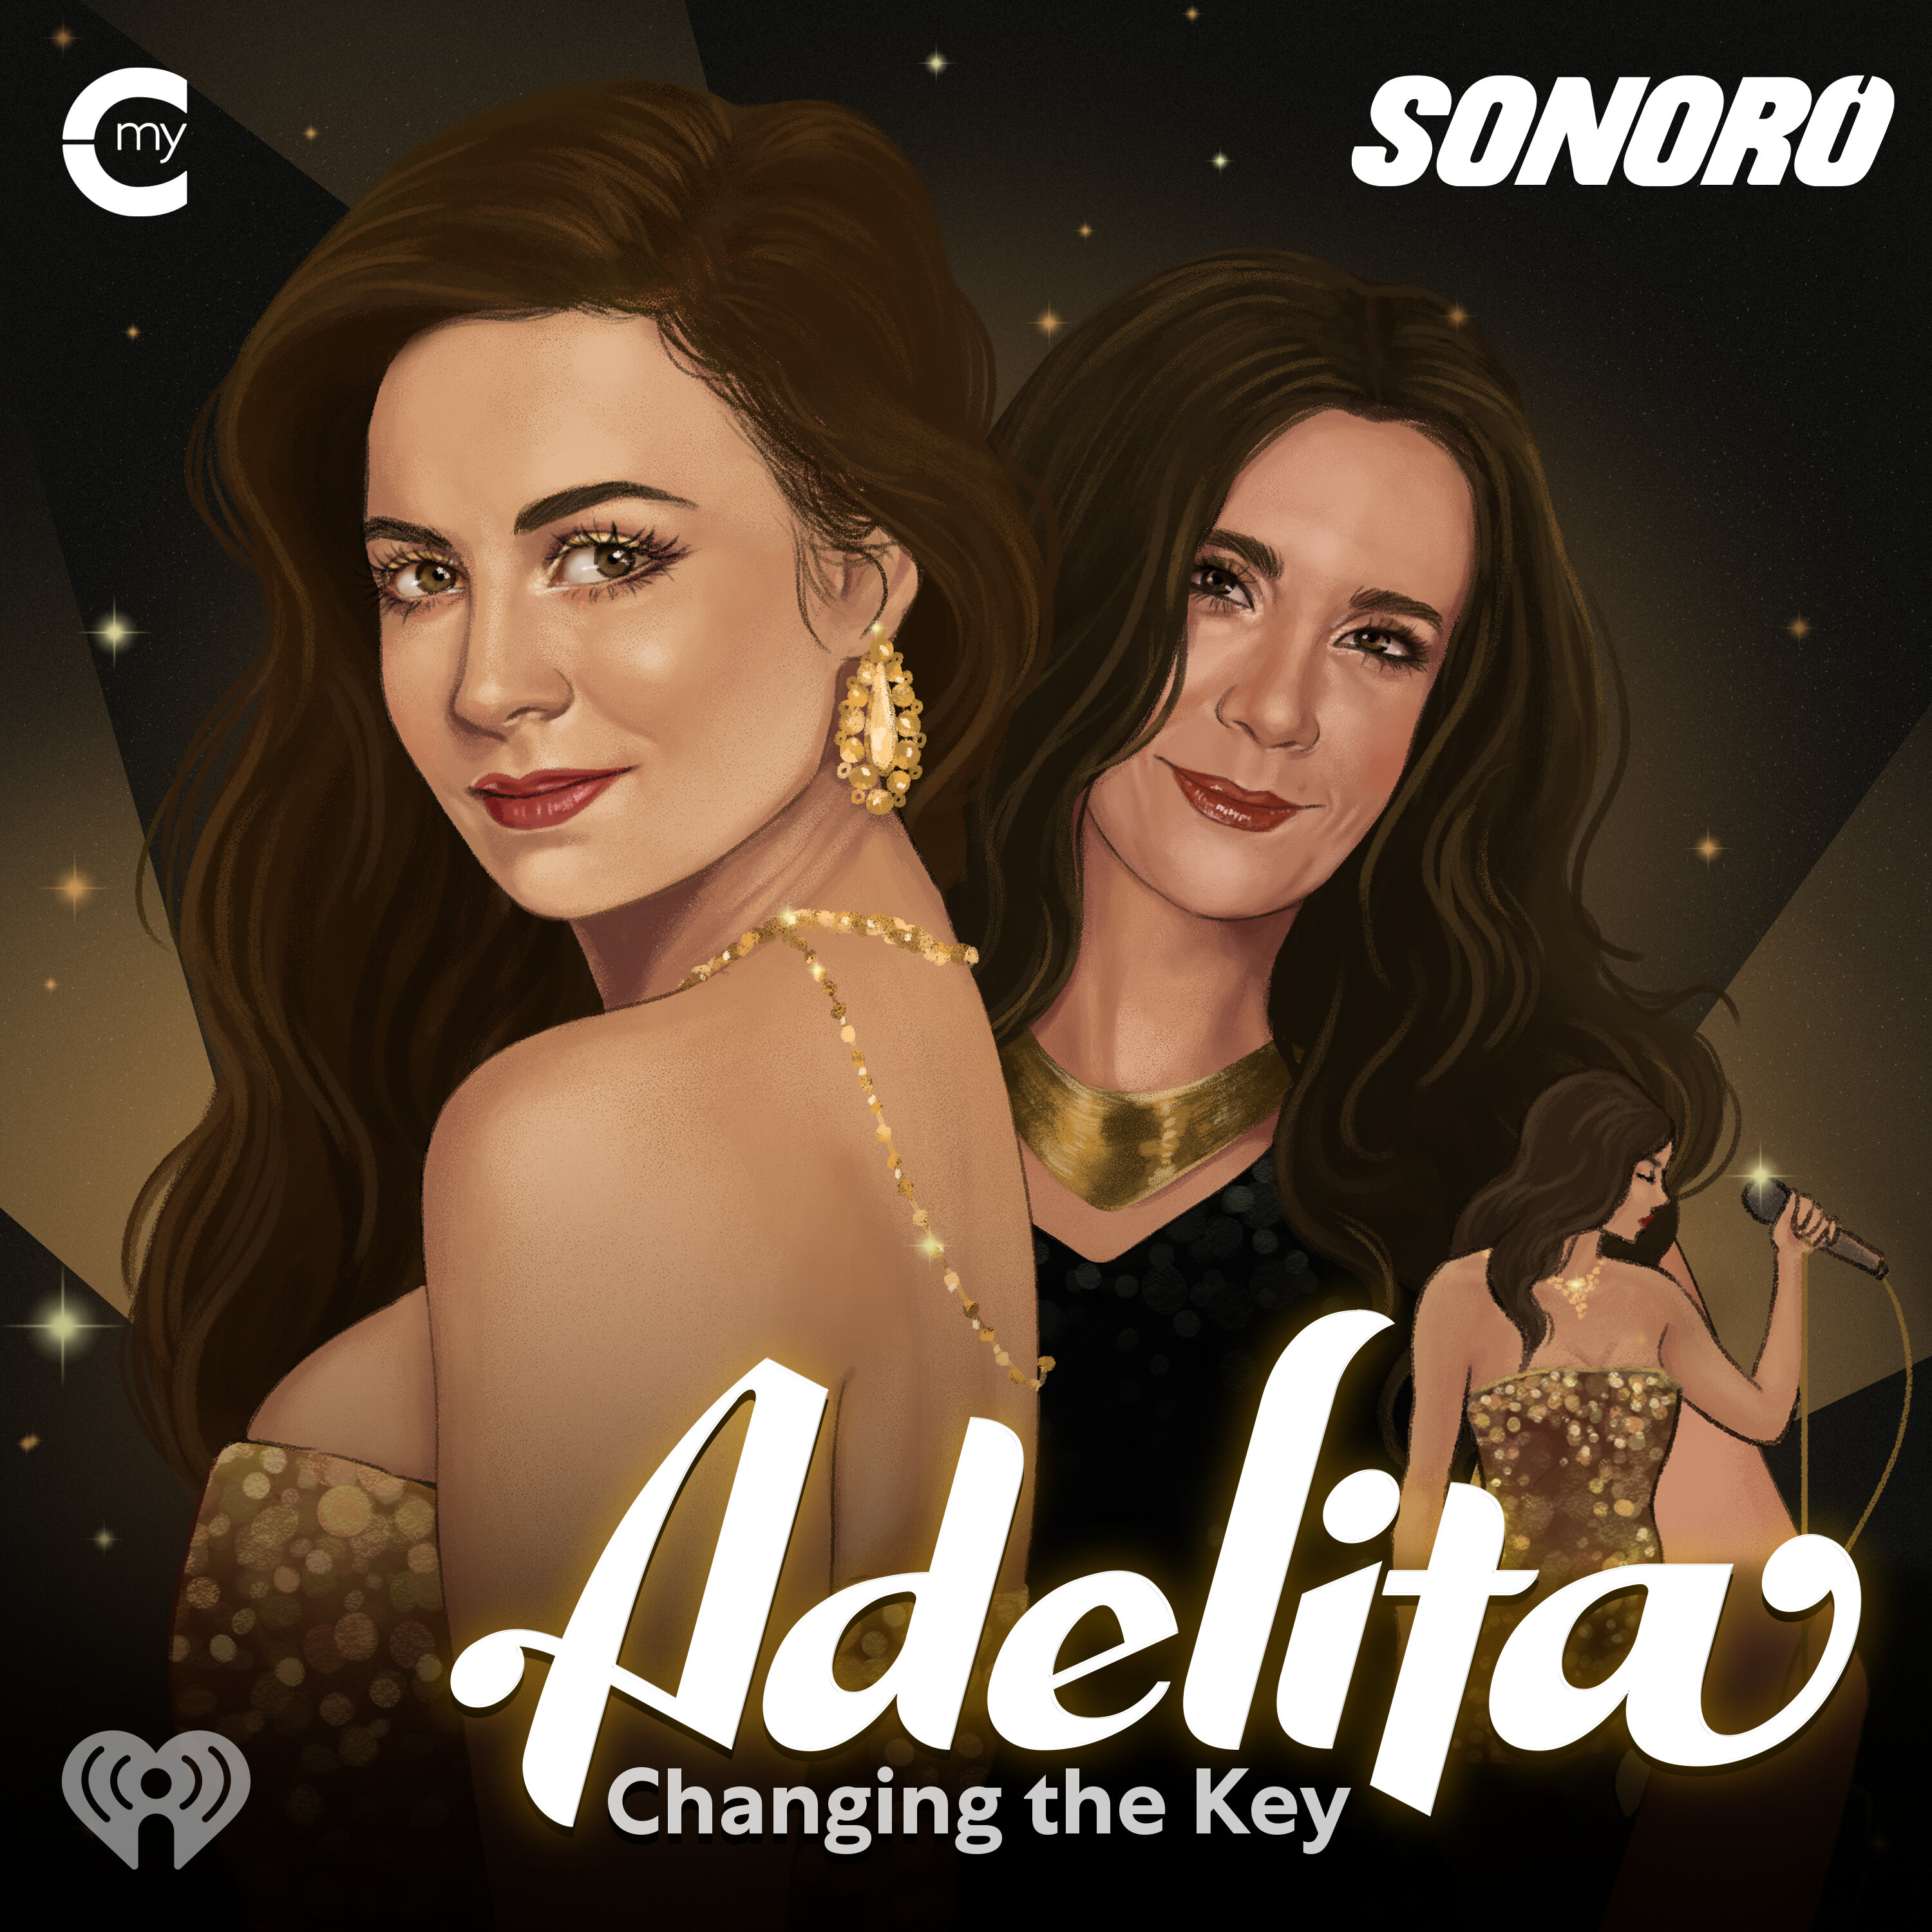 Ep 21 - Adelita: Changing The Key : "Los productores"